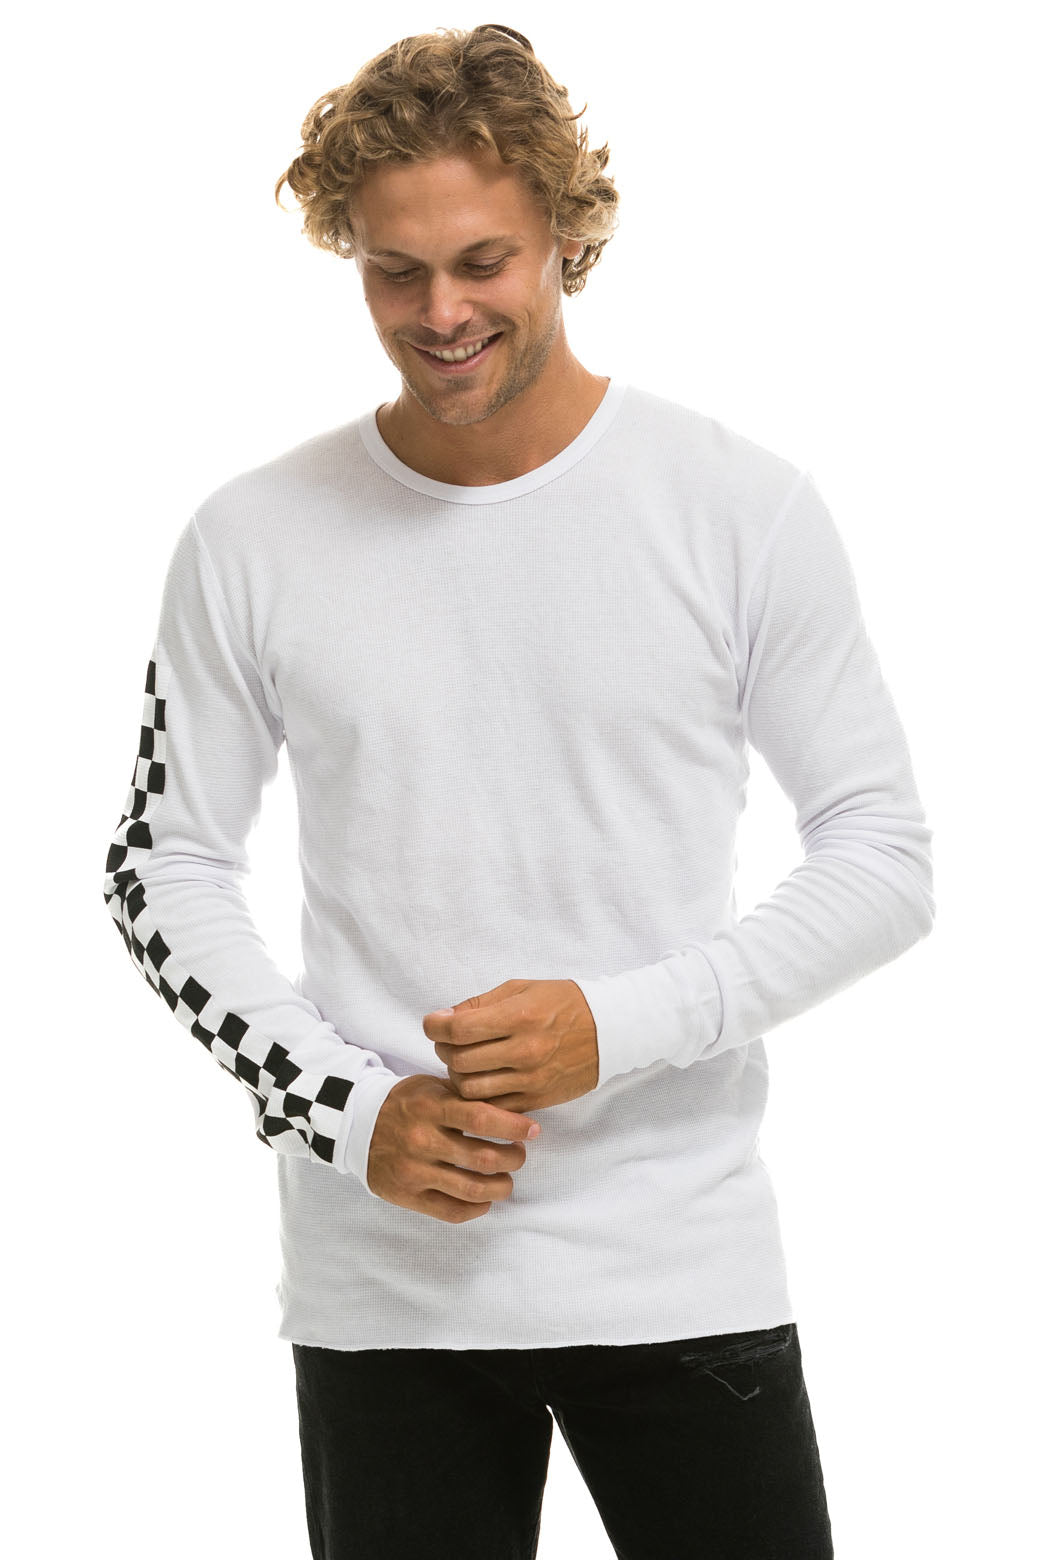 CHECK SLEEVE THERMAL - WHITE Thermal Aviator Nation 